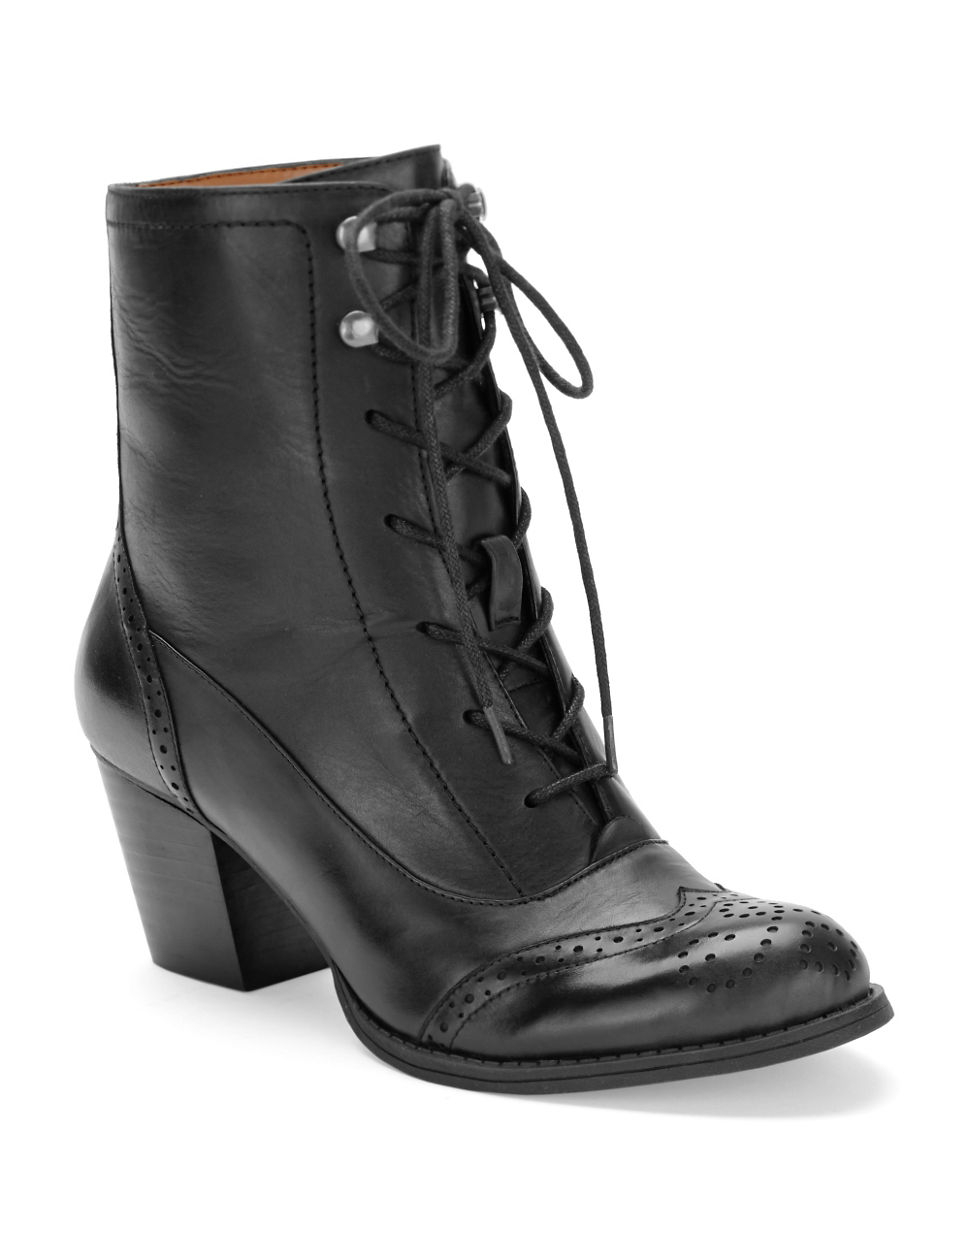 Nine West Coastgard Oxford Ankle Boots in Black - Lyst